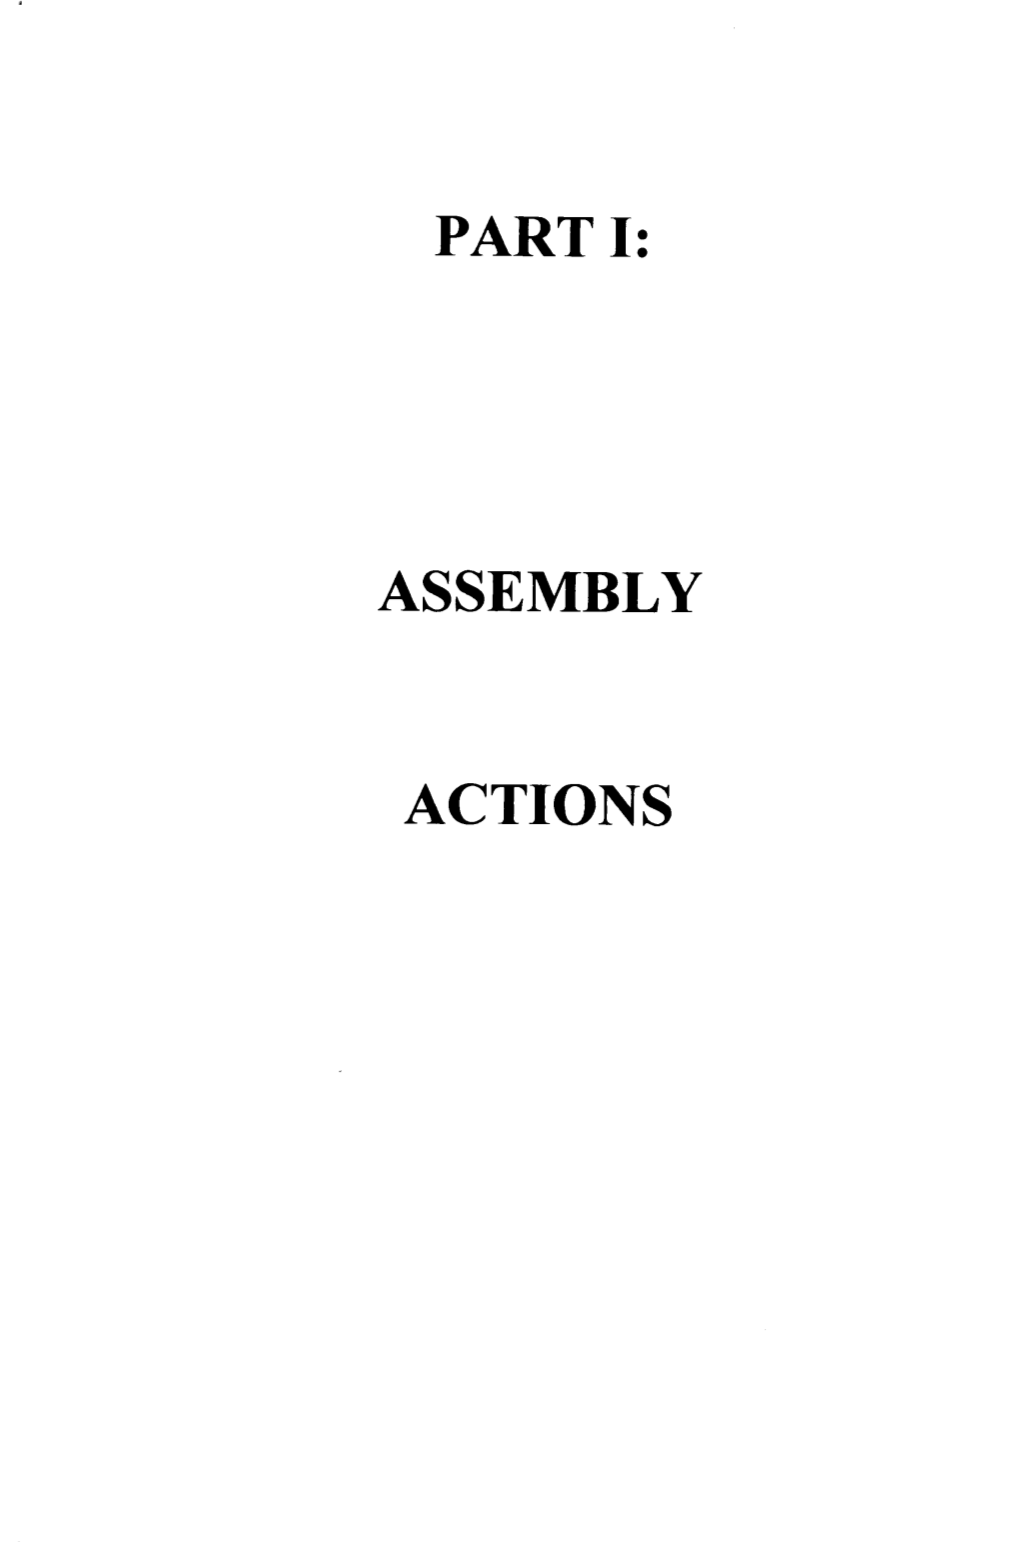 Part I: Assembly Actions